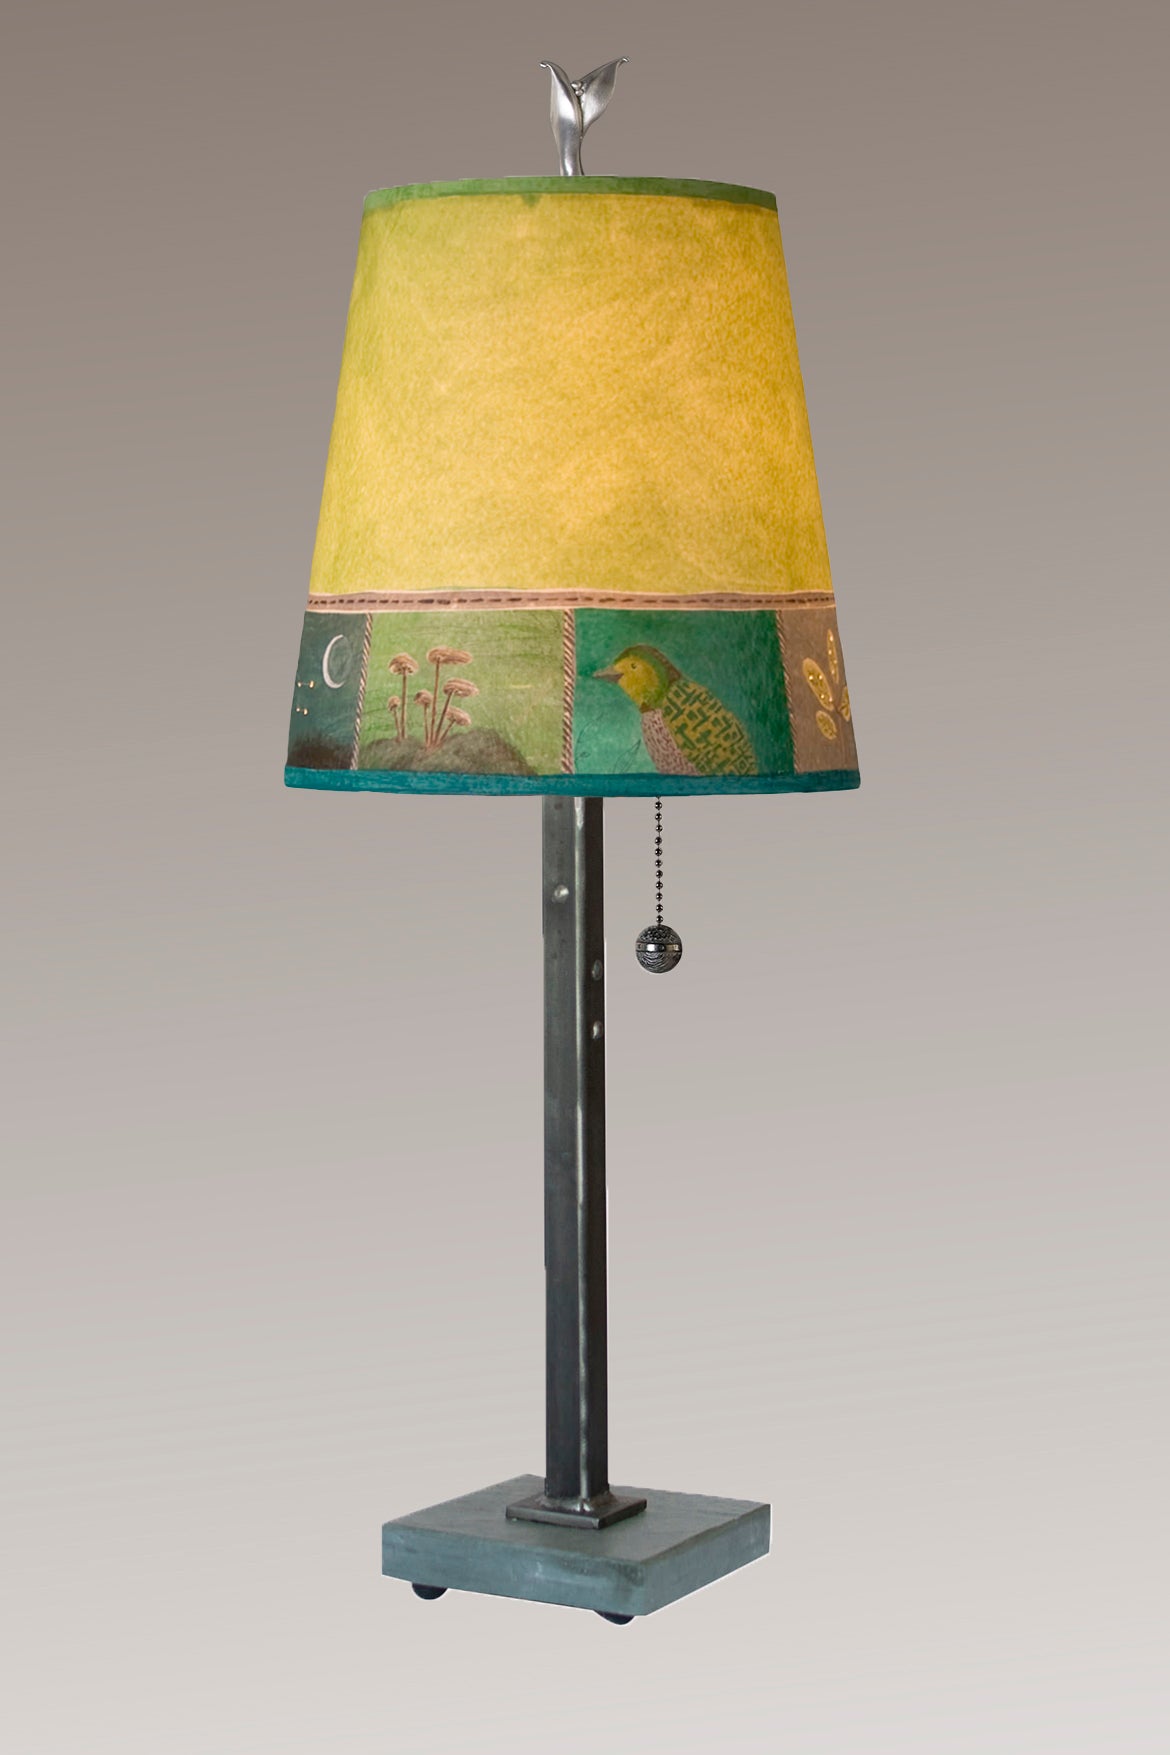 Steel Table Lamp with Small Drum Shade in Woodland Trails in Leaf